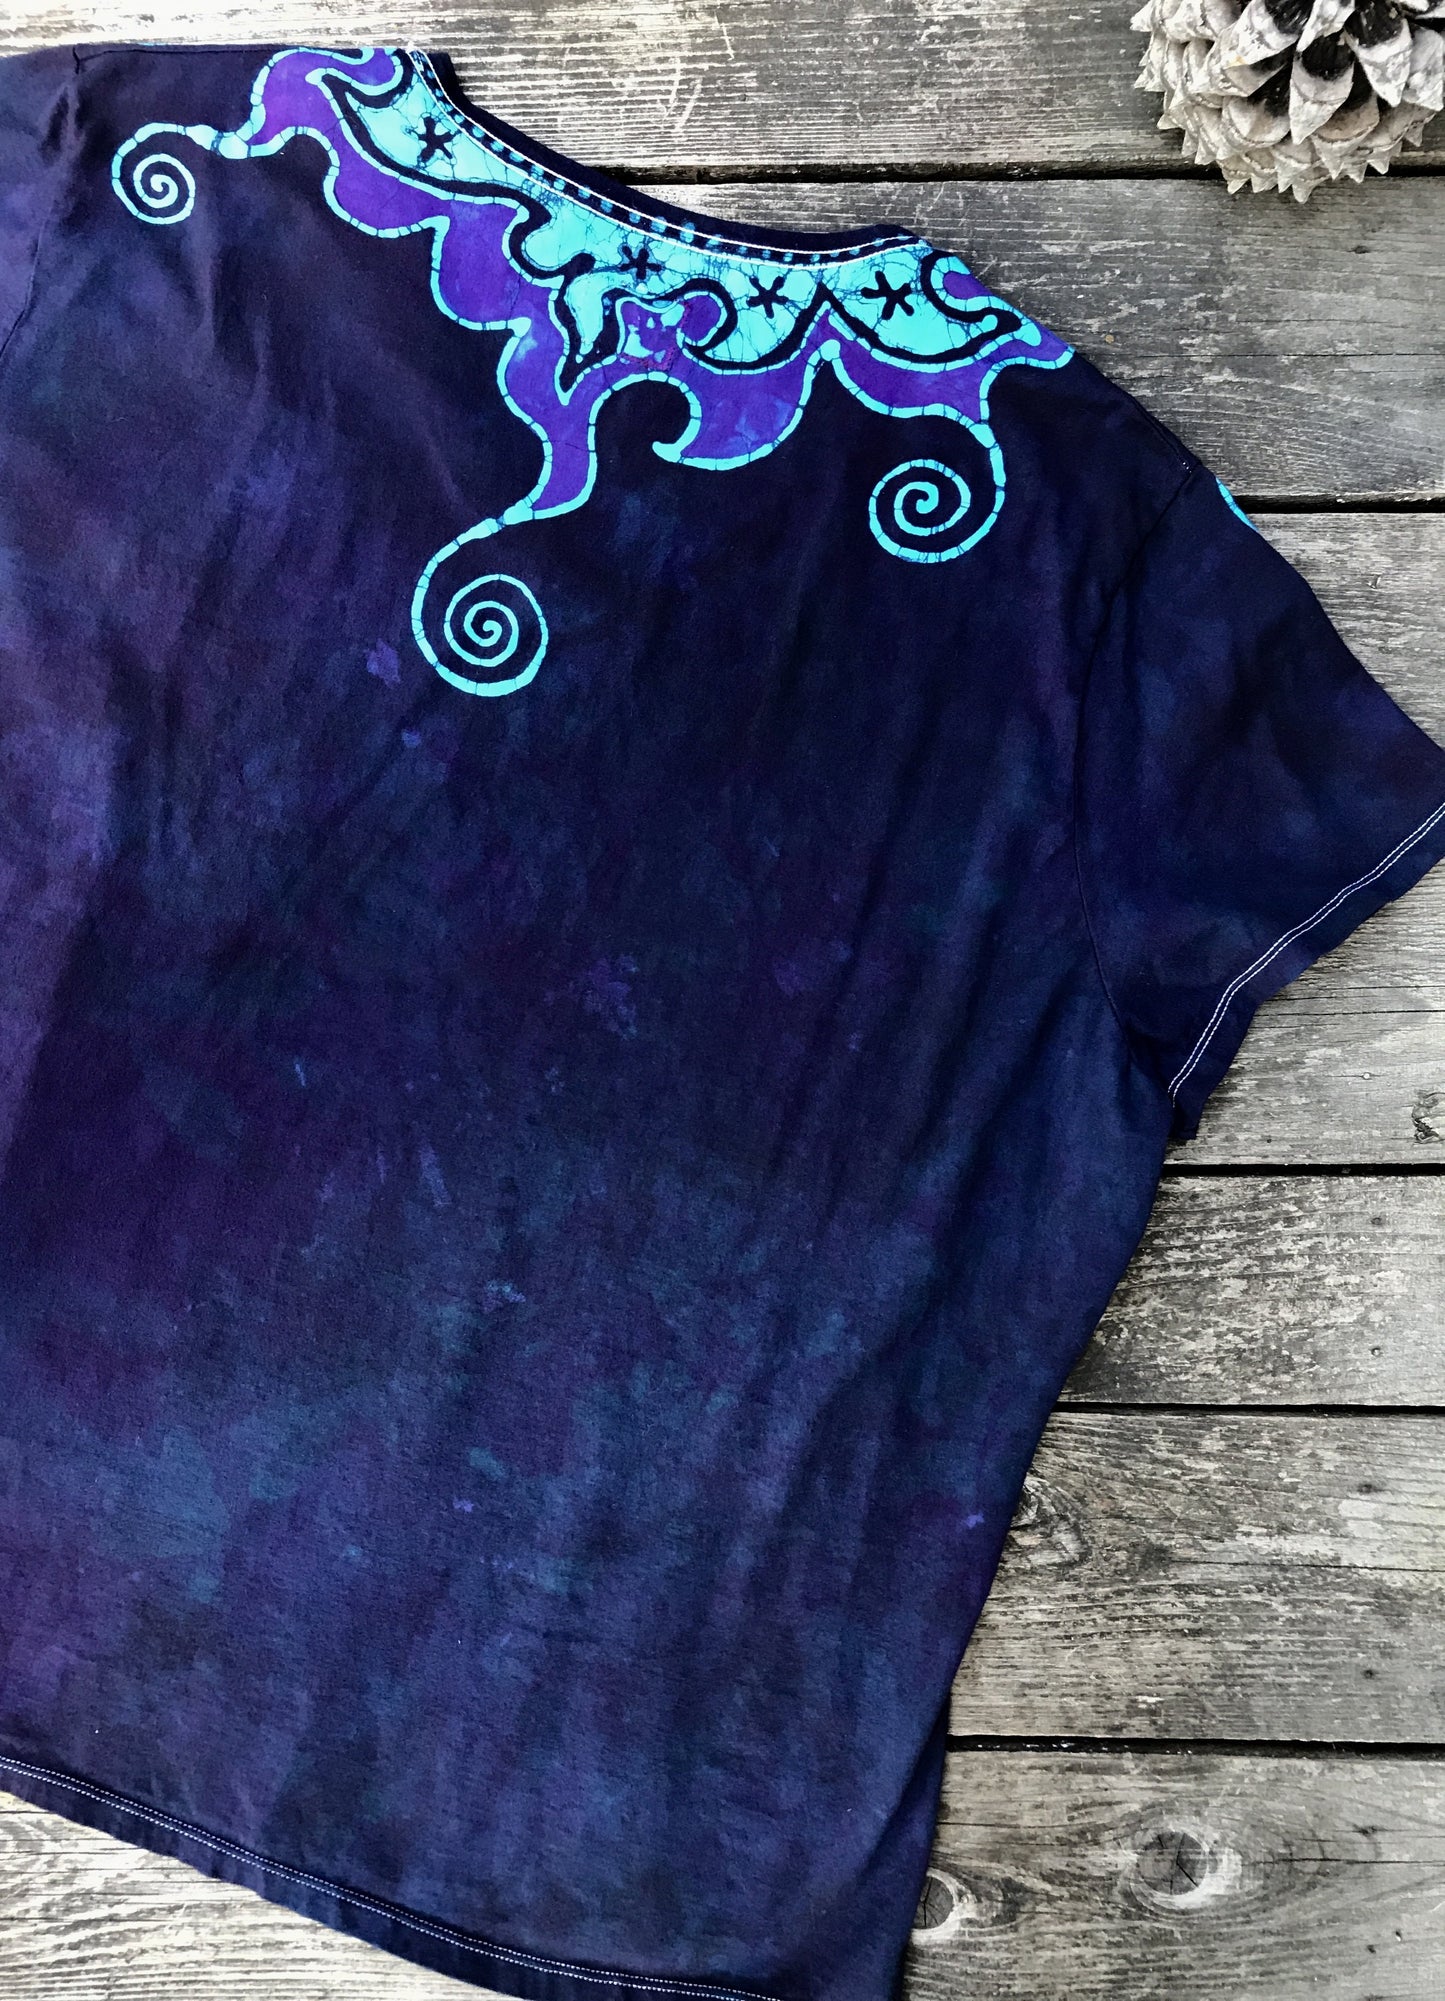 Purple and Turquoise Waves of Moonlight Hand Painted Batik Vneck